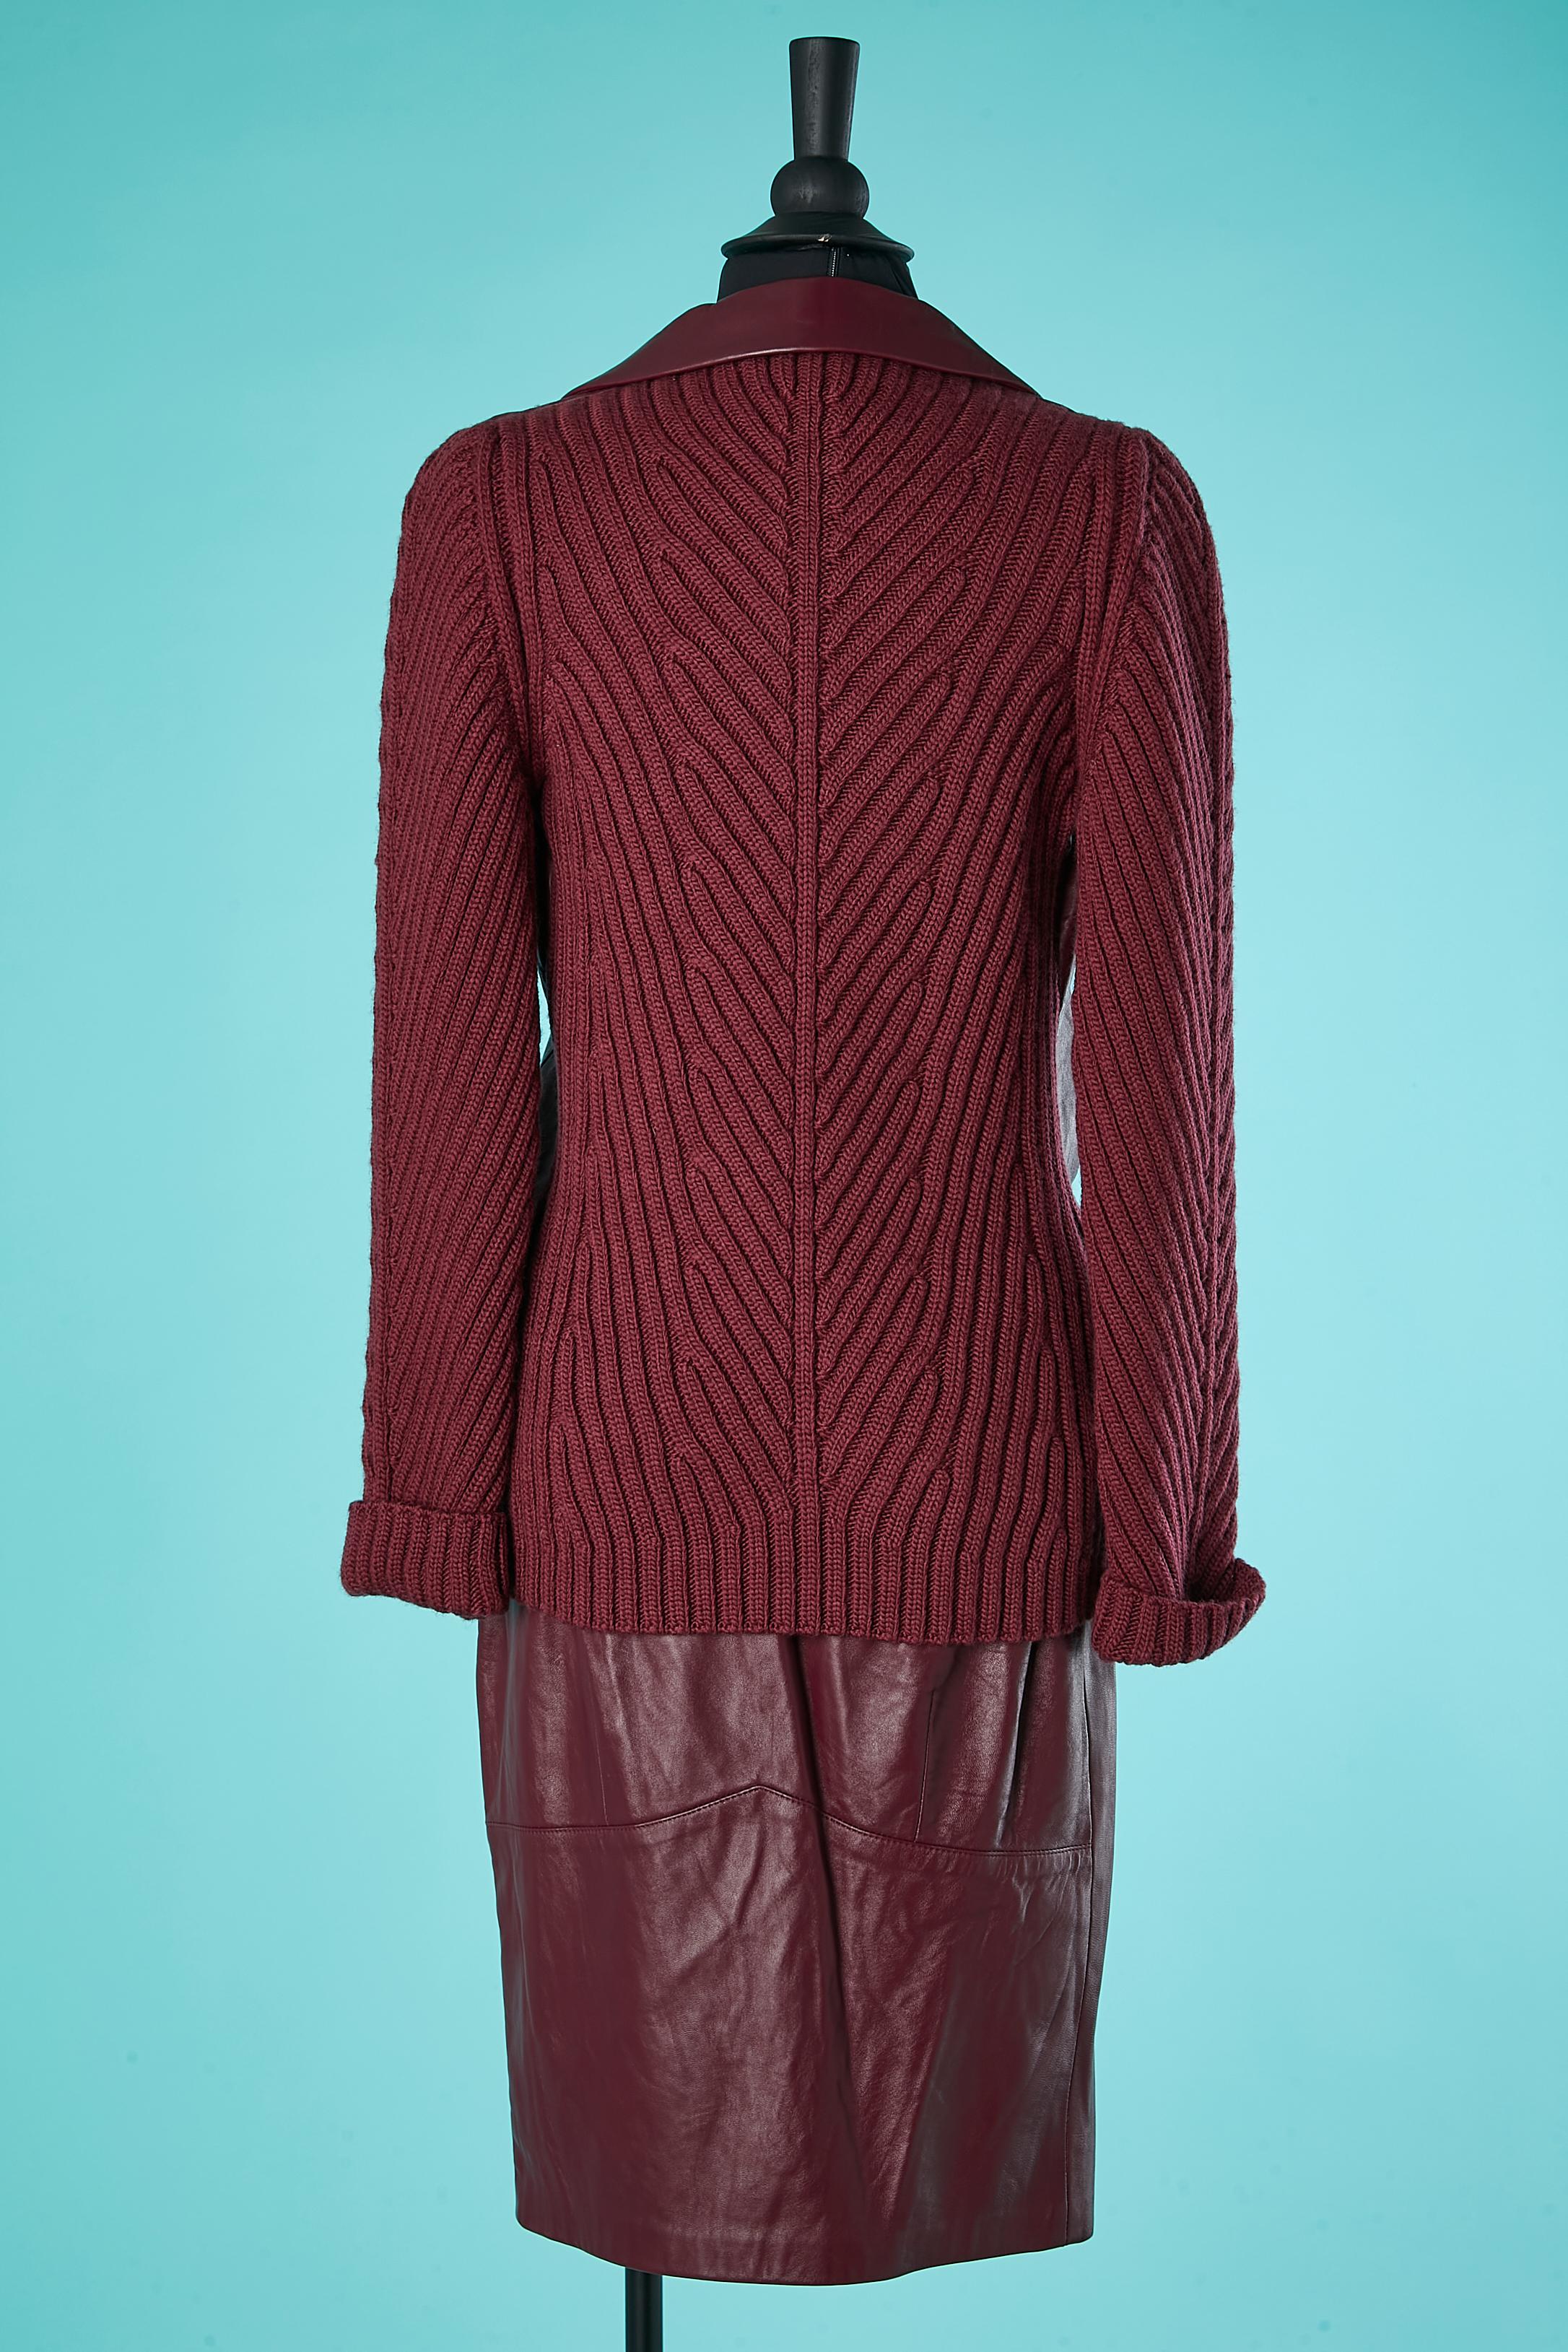 Burgundy skirt-suit in wool knit and leather MUGLER Circa 1990's  For Sale 1